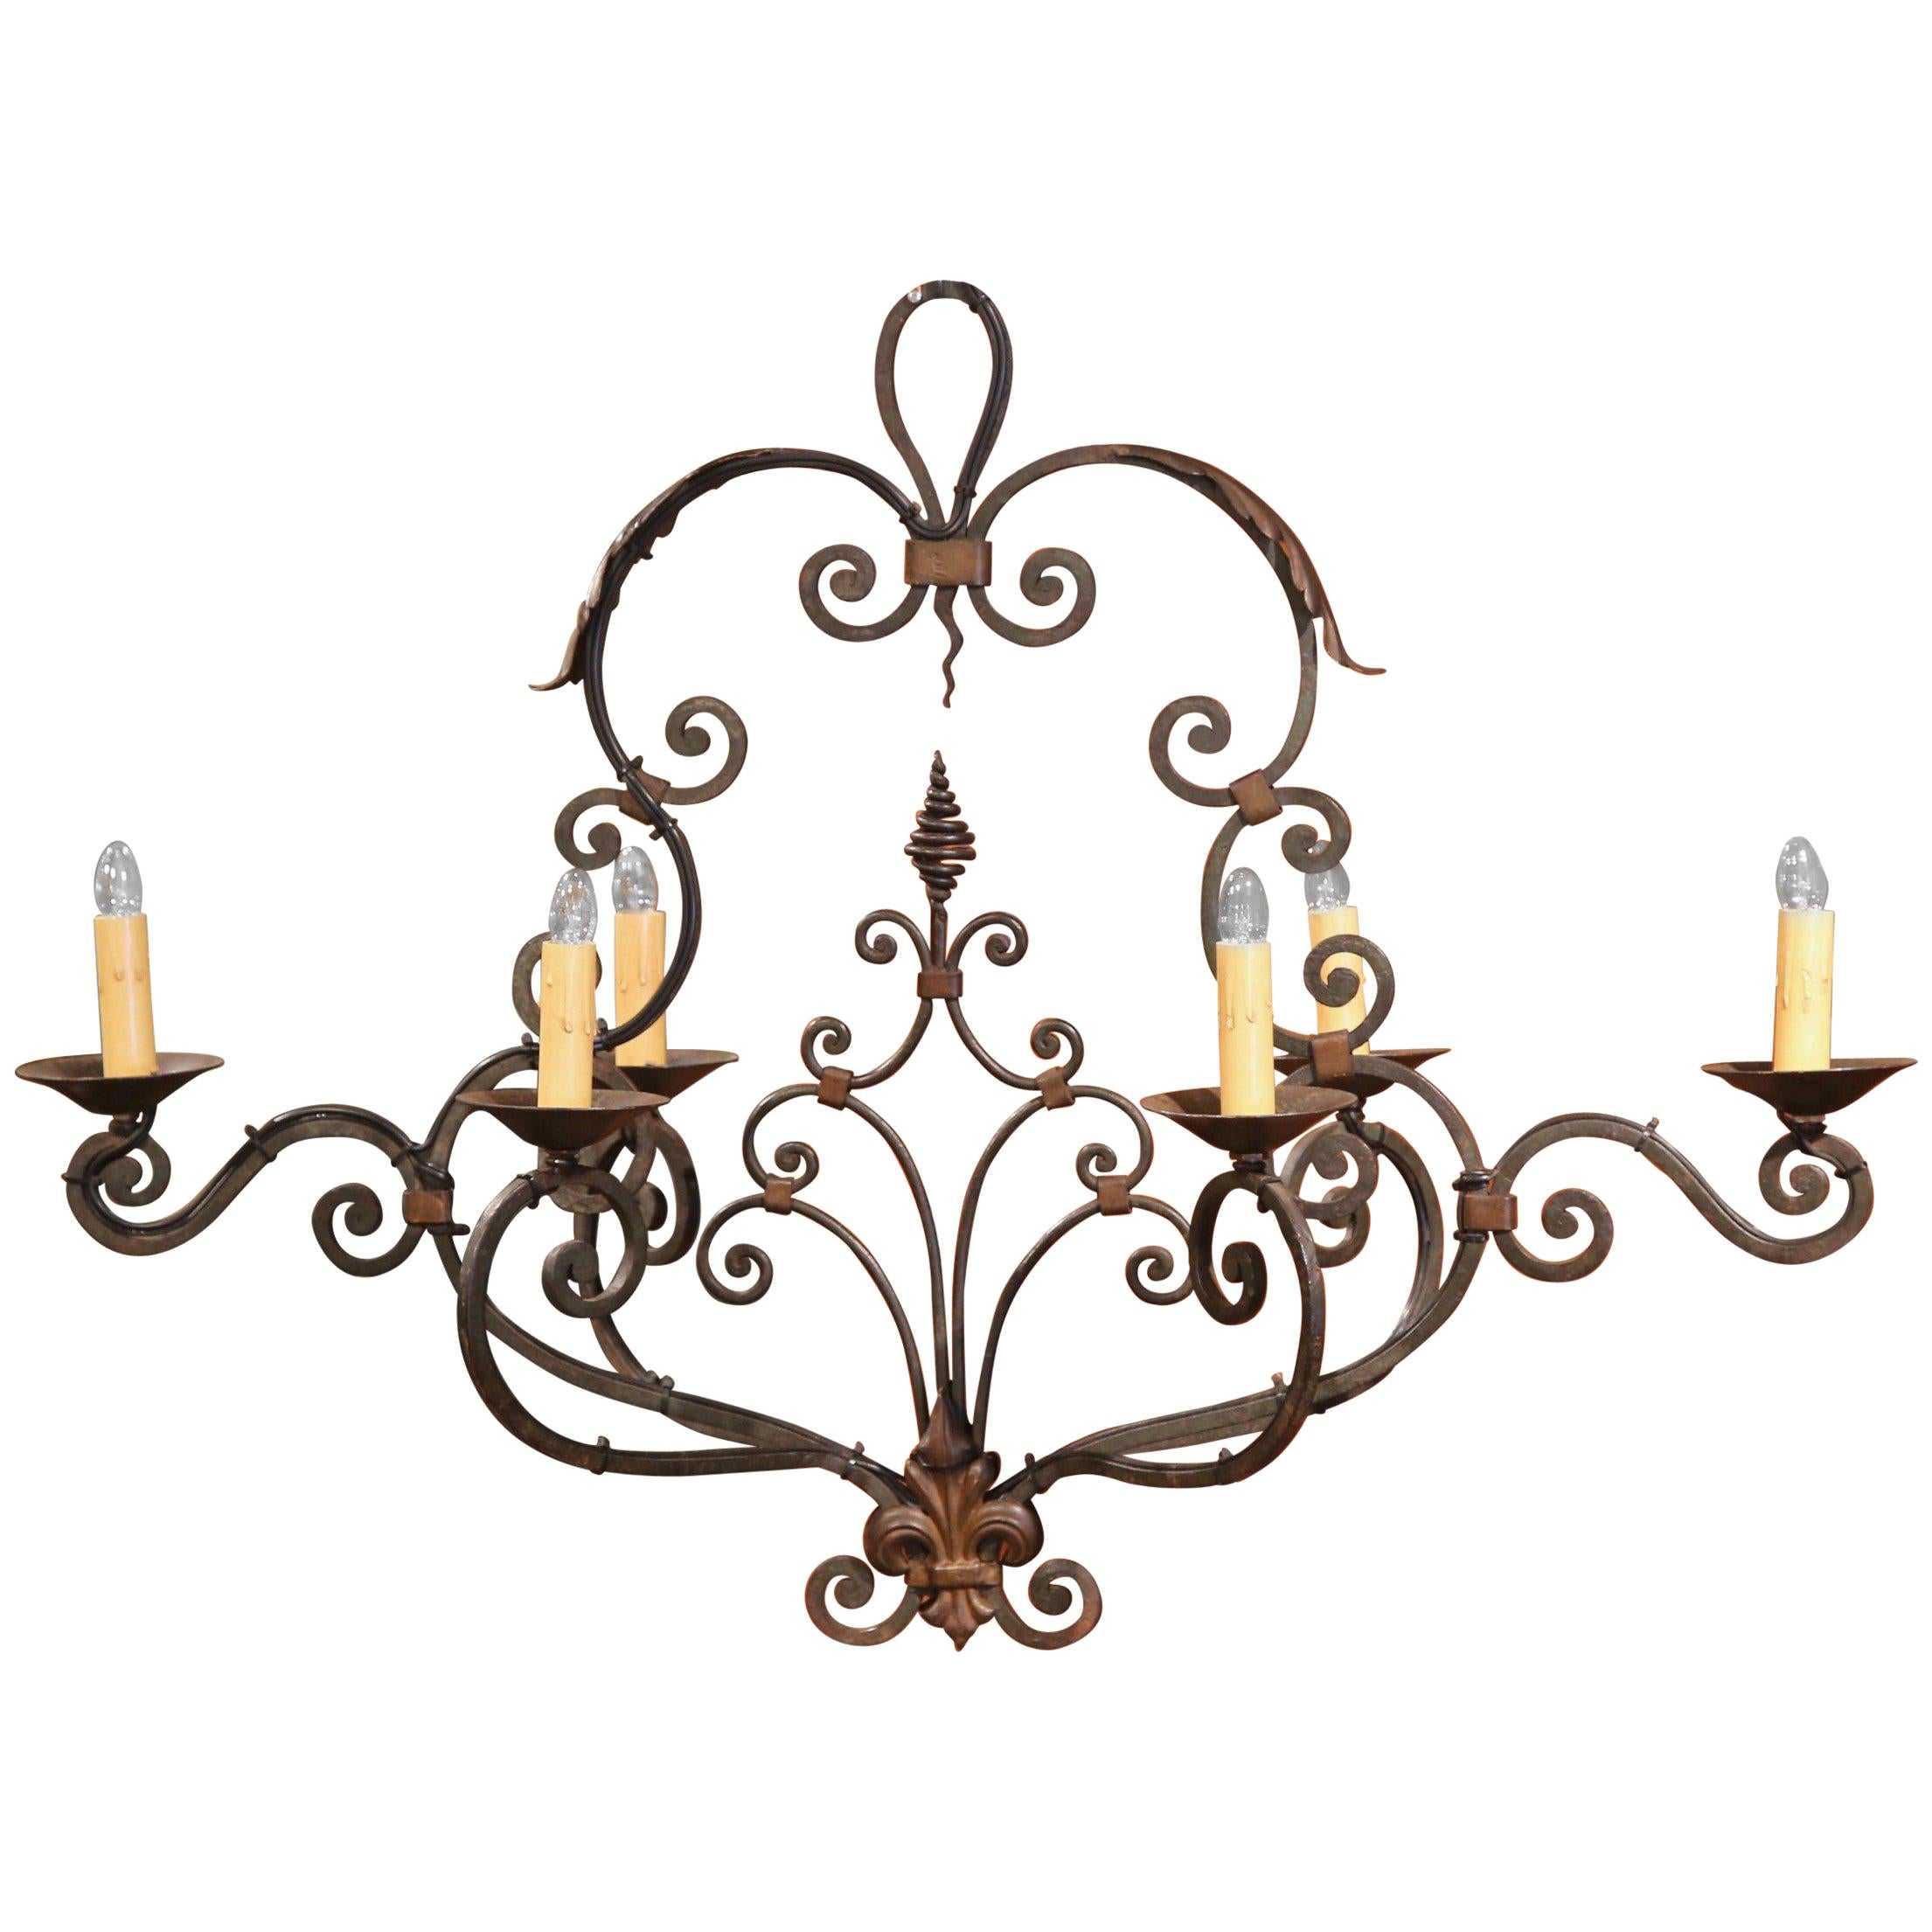 Early 20th Century French Painted Six-Light Iron Chandelier with Fleur-de-Lys